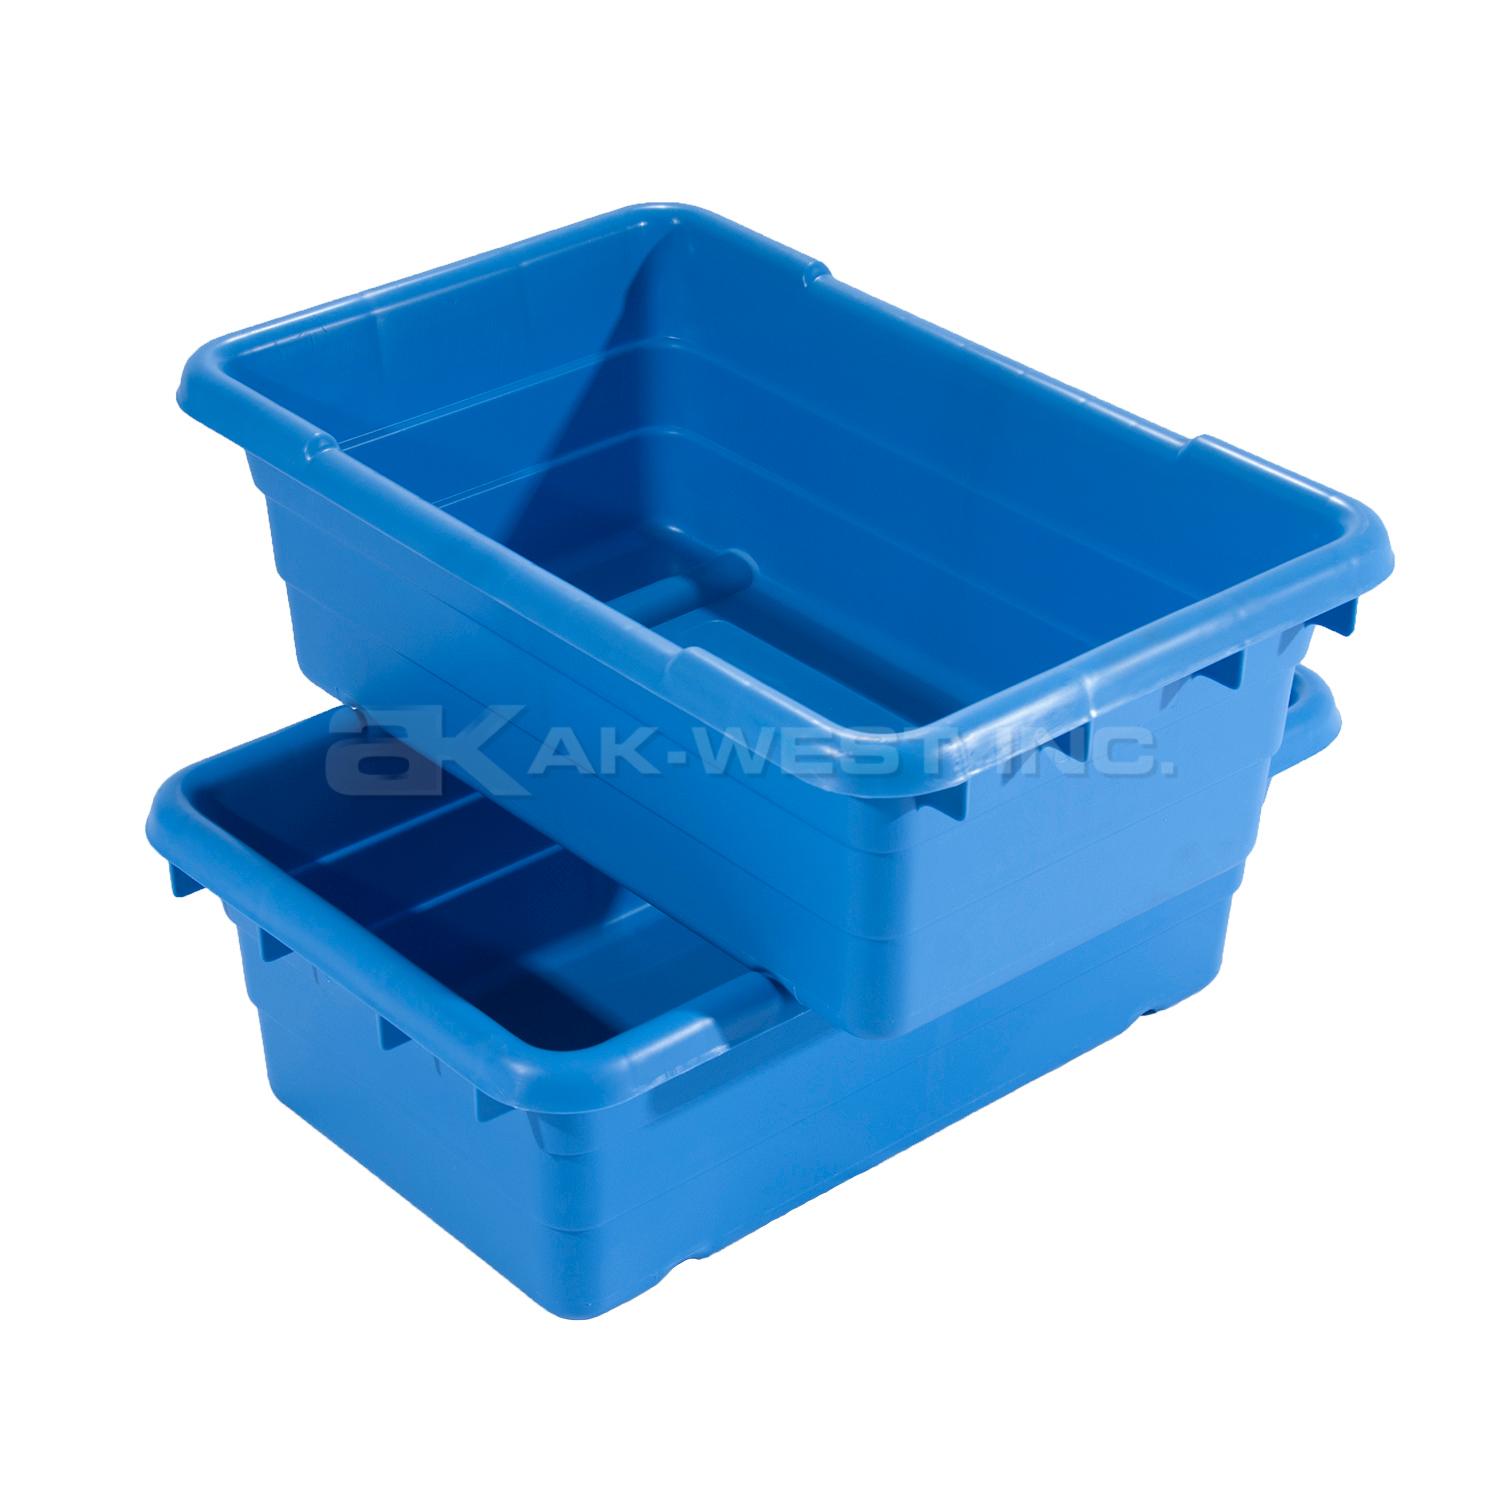 Blue, 25" x 16" x 9", Jumbo Lug Cross Stack and Nest Container